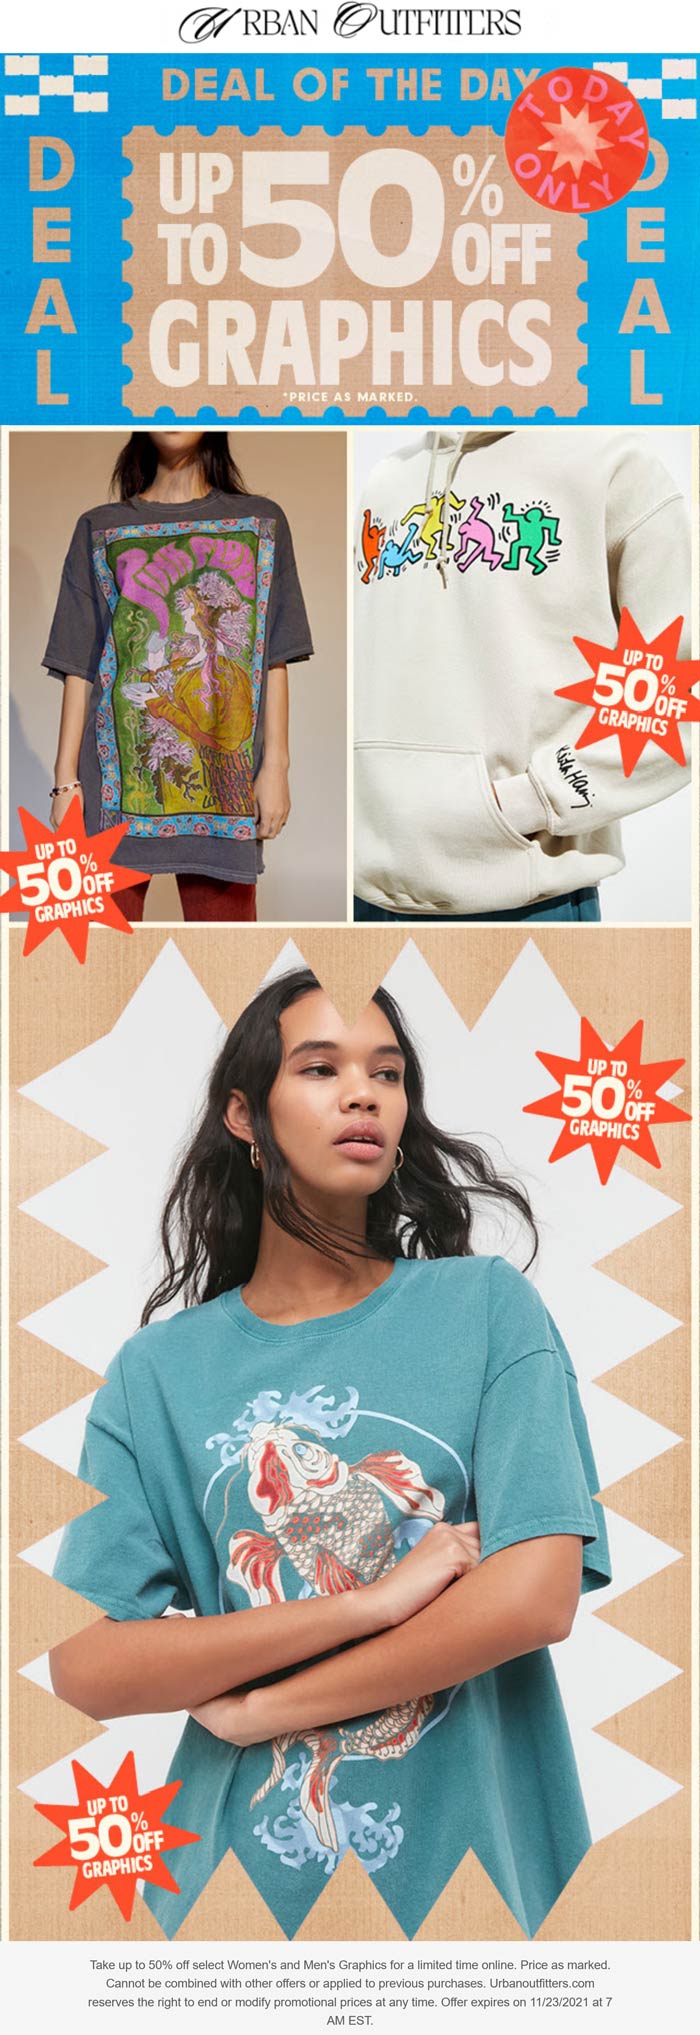 Urban Outfitters stores Coupon  50% off most graphics today at Urban Outfitters #urbanoutfitters 